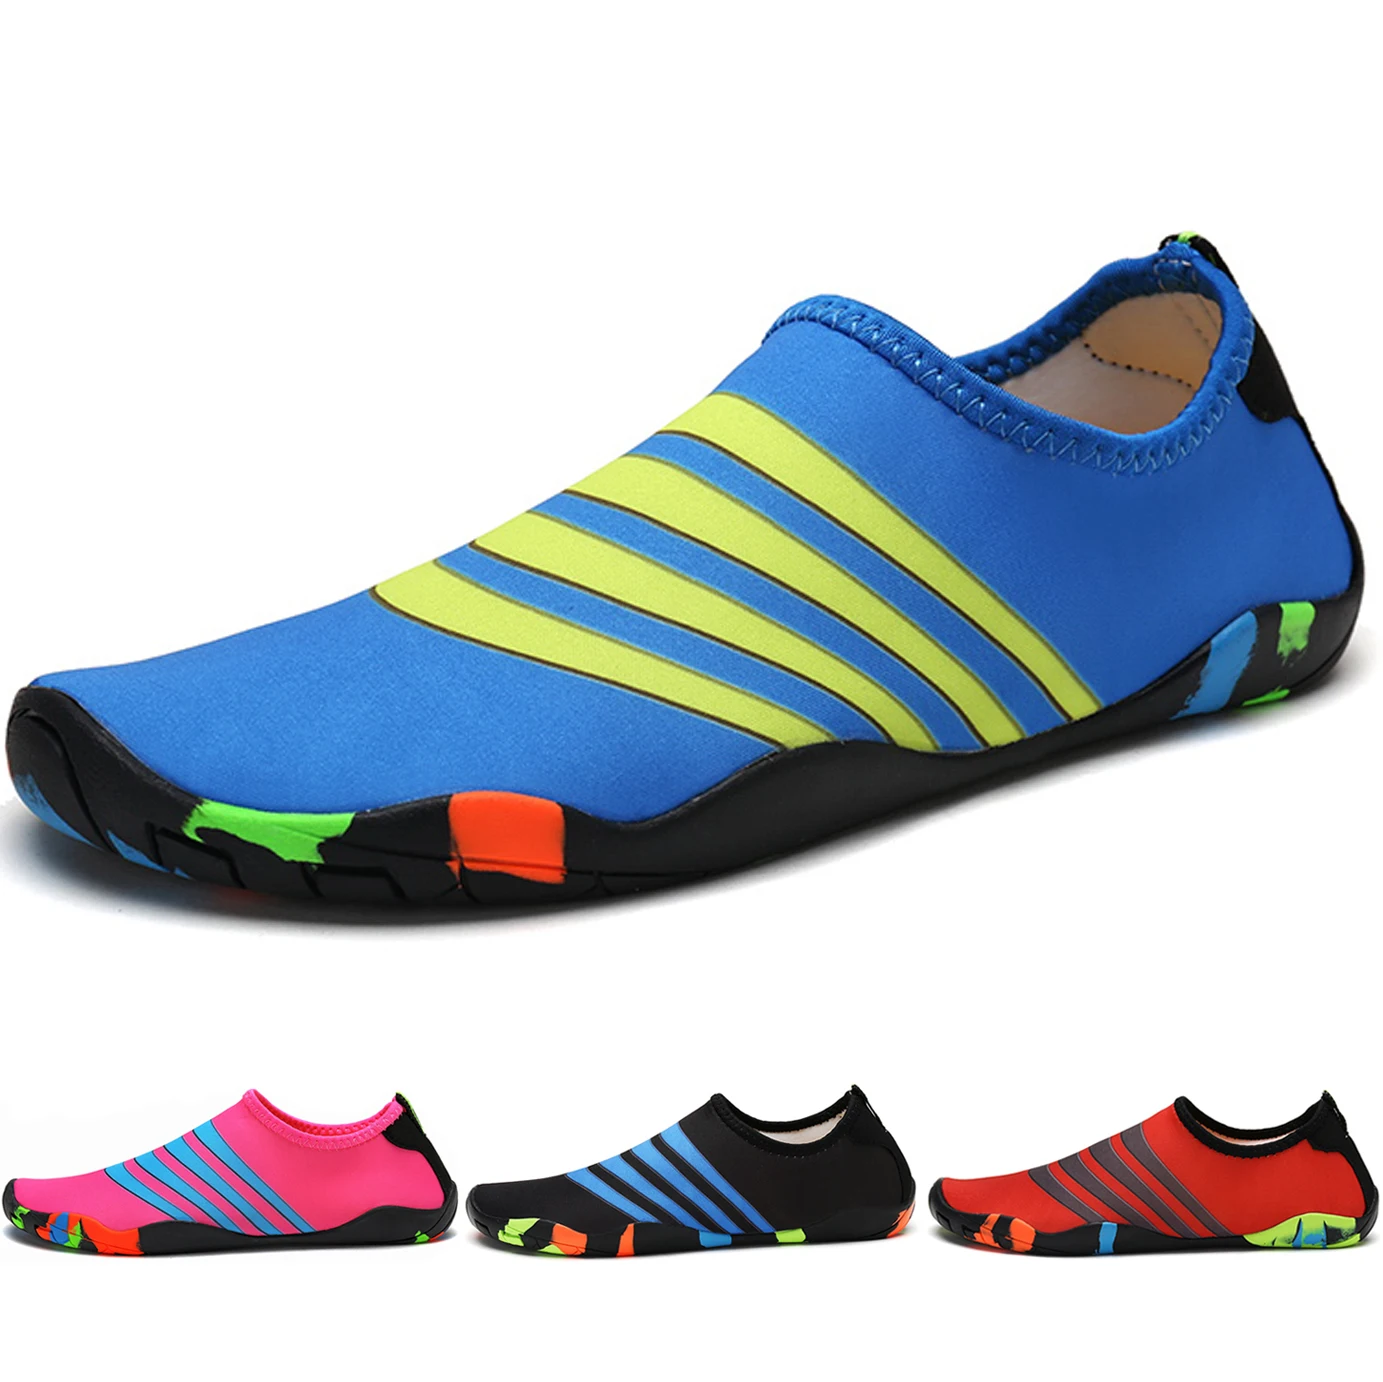 Parent-child wading shoes Quick-drying swimming shoes Colorful children's beach shoes Men's and women's water shoes Aqua shoes